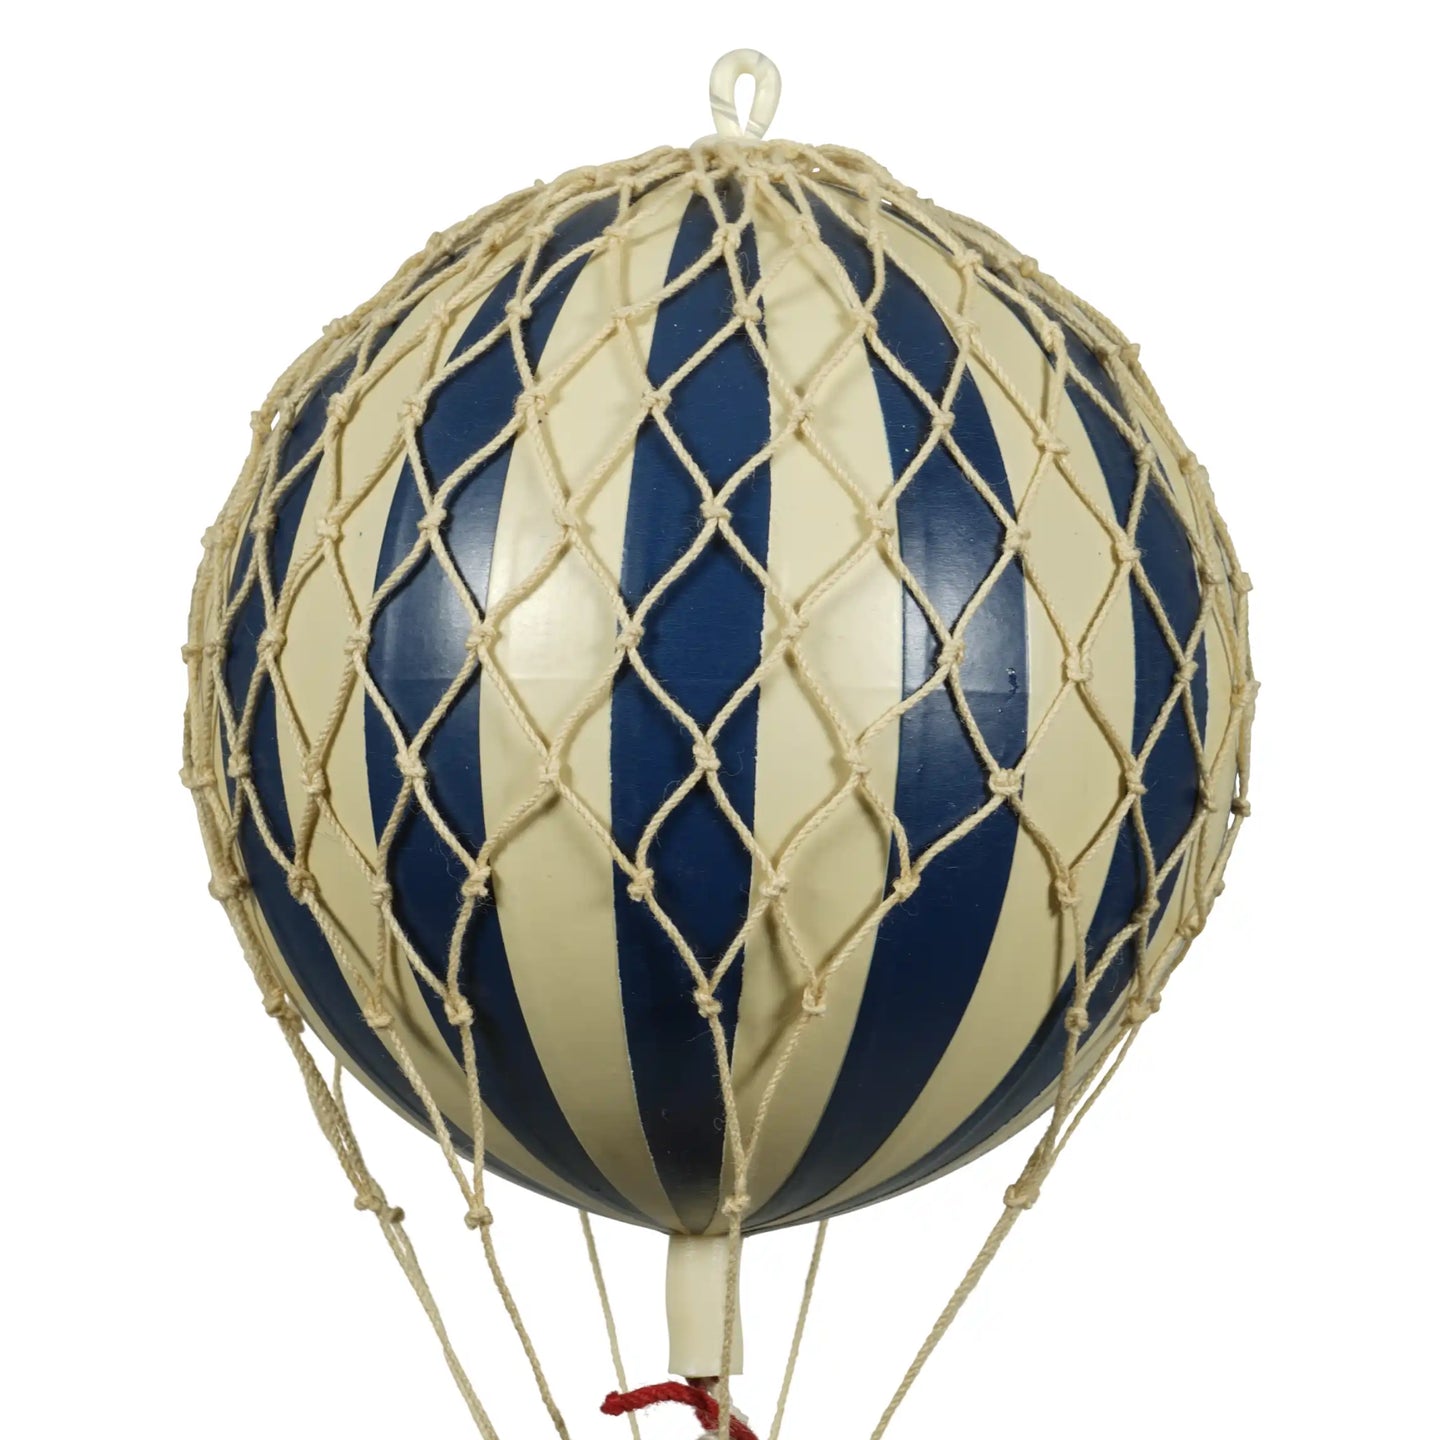 Authentic Models Floating The Skies Air Balloon 5.12 x 3.35 in, Navy Blue / Ivory - AP160N